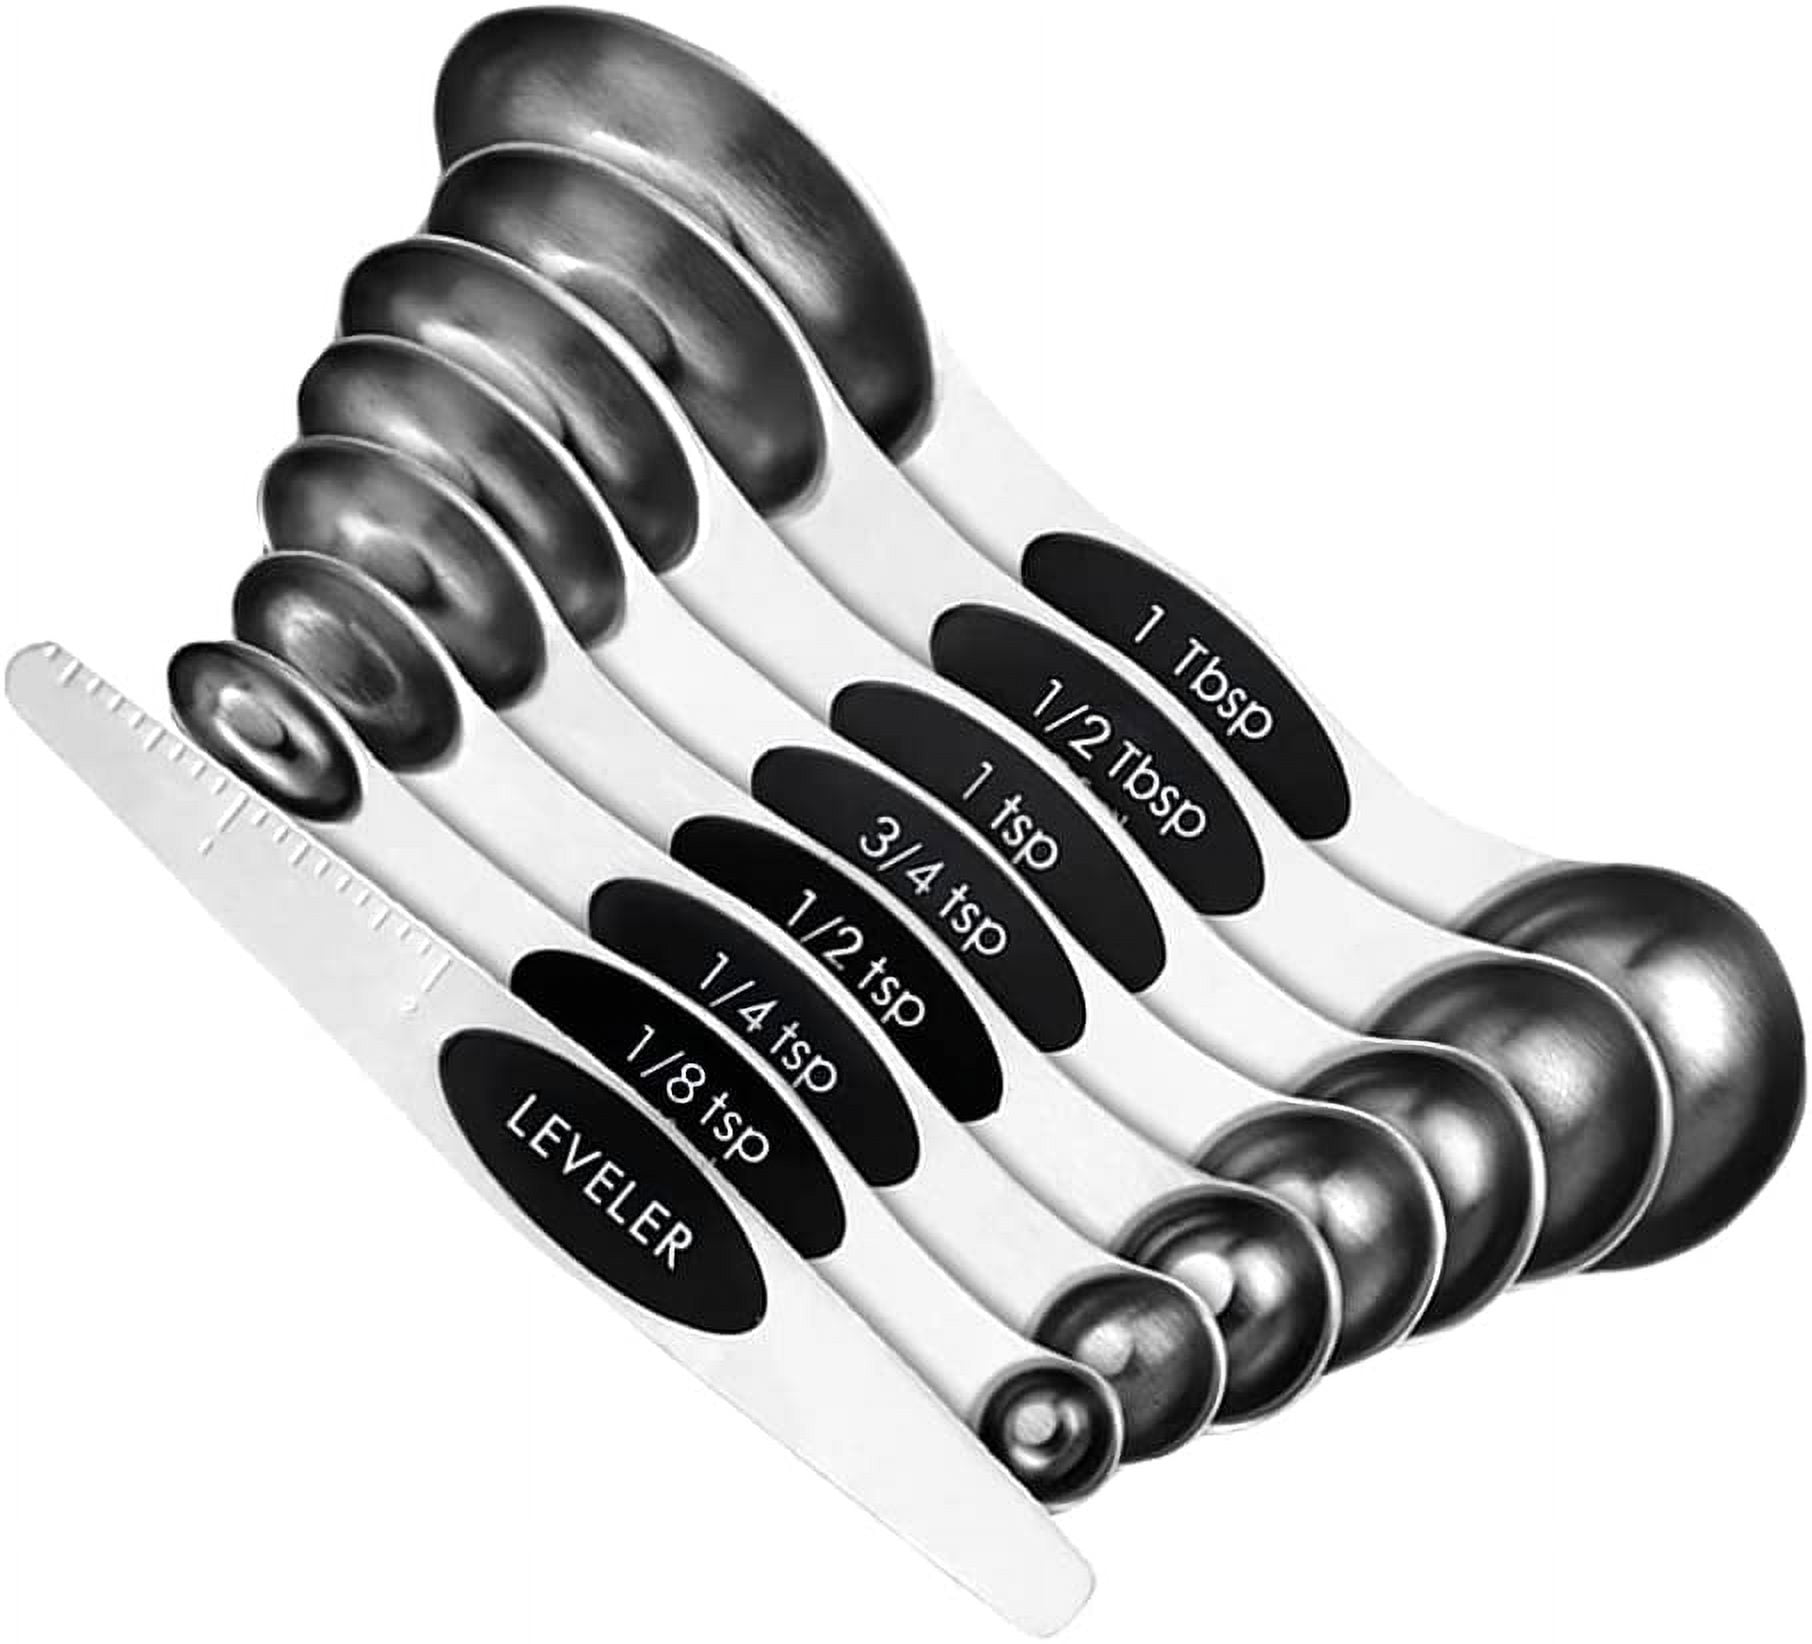 Magnetic Measuring Spoons Set of 9 Stainless Steel Stackable Dual Sided  Teaspoon Tablespoon-Black - Measuring Cups & Spoons - New York, New York, Facebook Marketplace